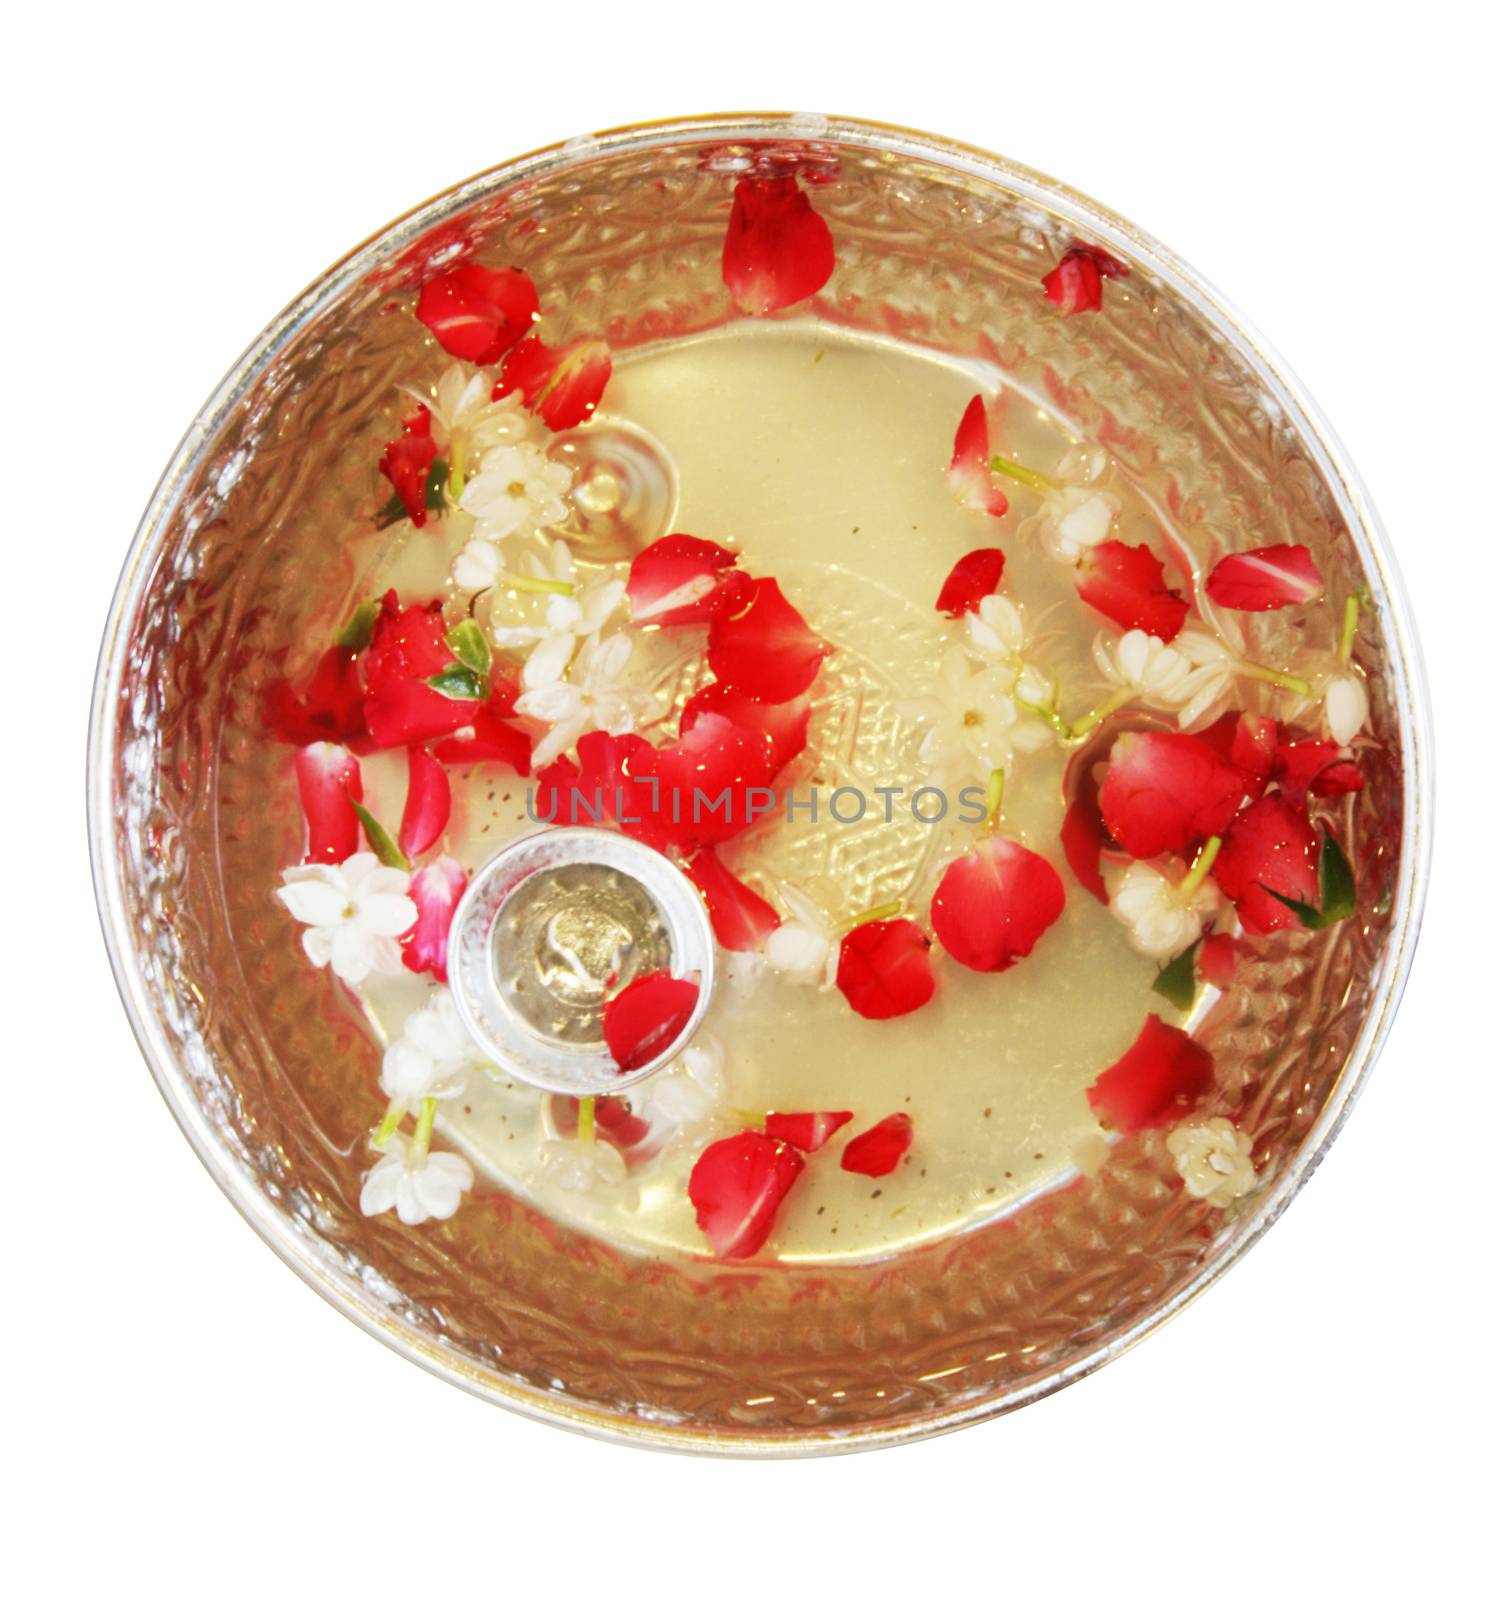 Thai Traditional to make a special aroma water for good smell,good emotion,decorating and show the respect to our parrent with tradition.Use rose,jasmin,water on the silver bowl.This short is took in top view and isolate white background.